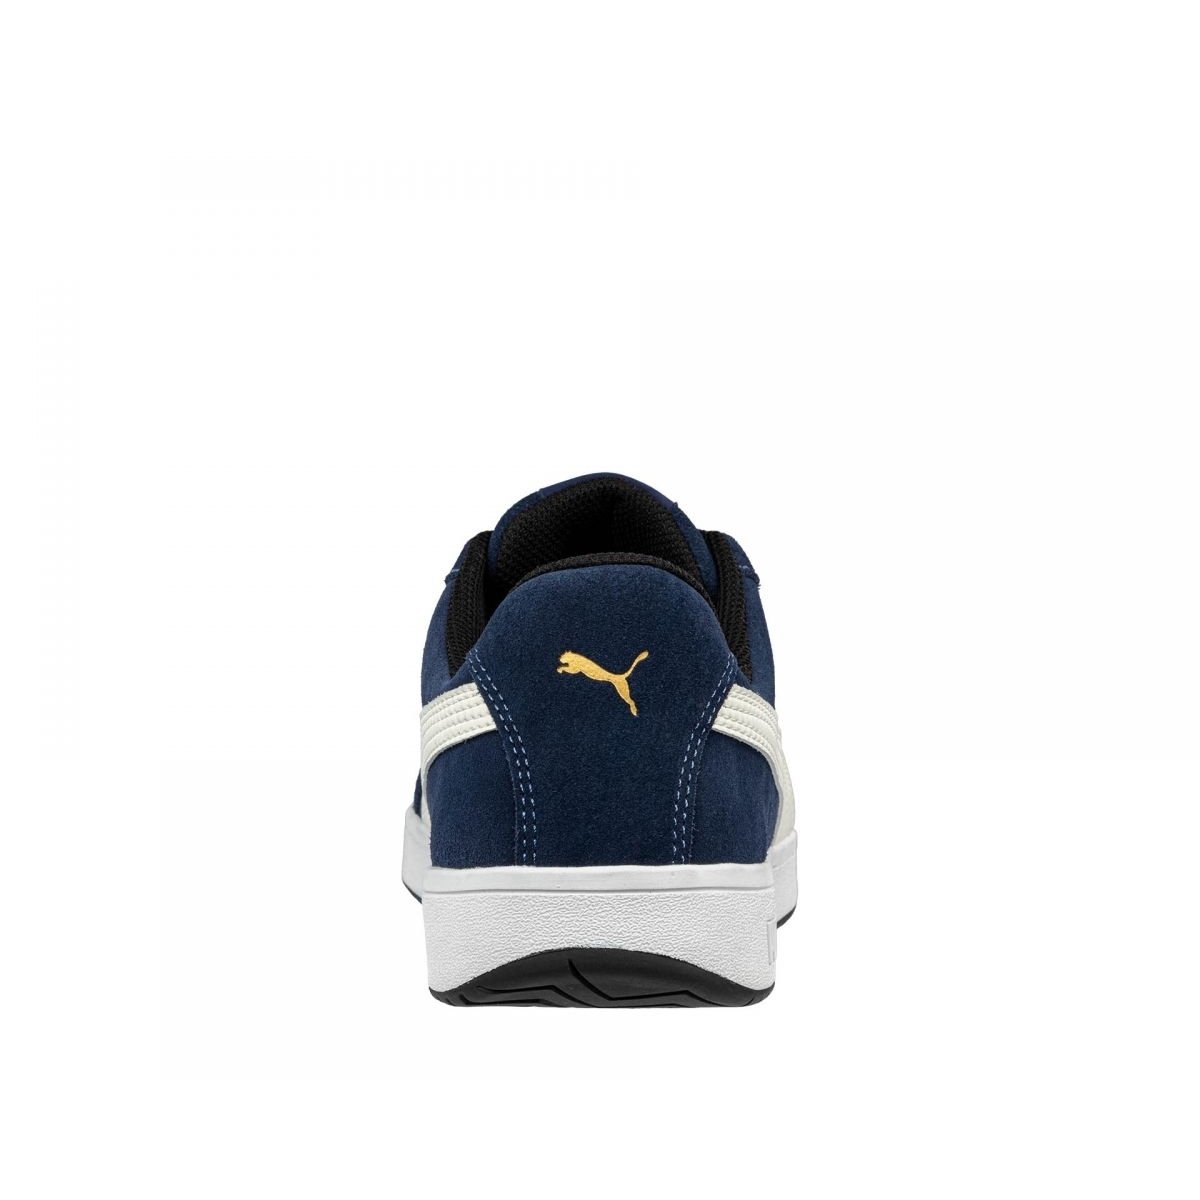 PUMA Safety Men's Iconic Low Composite Toe EH Work Shoes Navy Suede - 640025 ONE SIZE Navy - Navy, 14